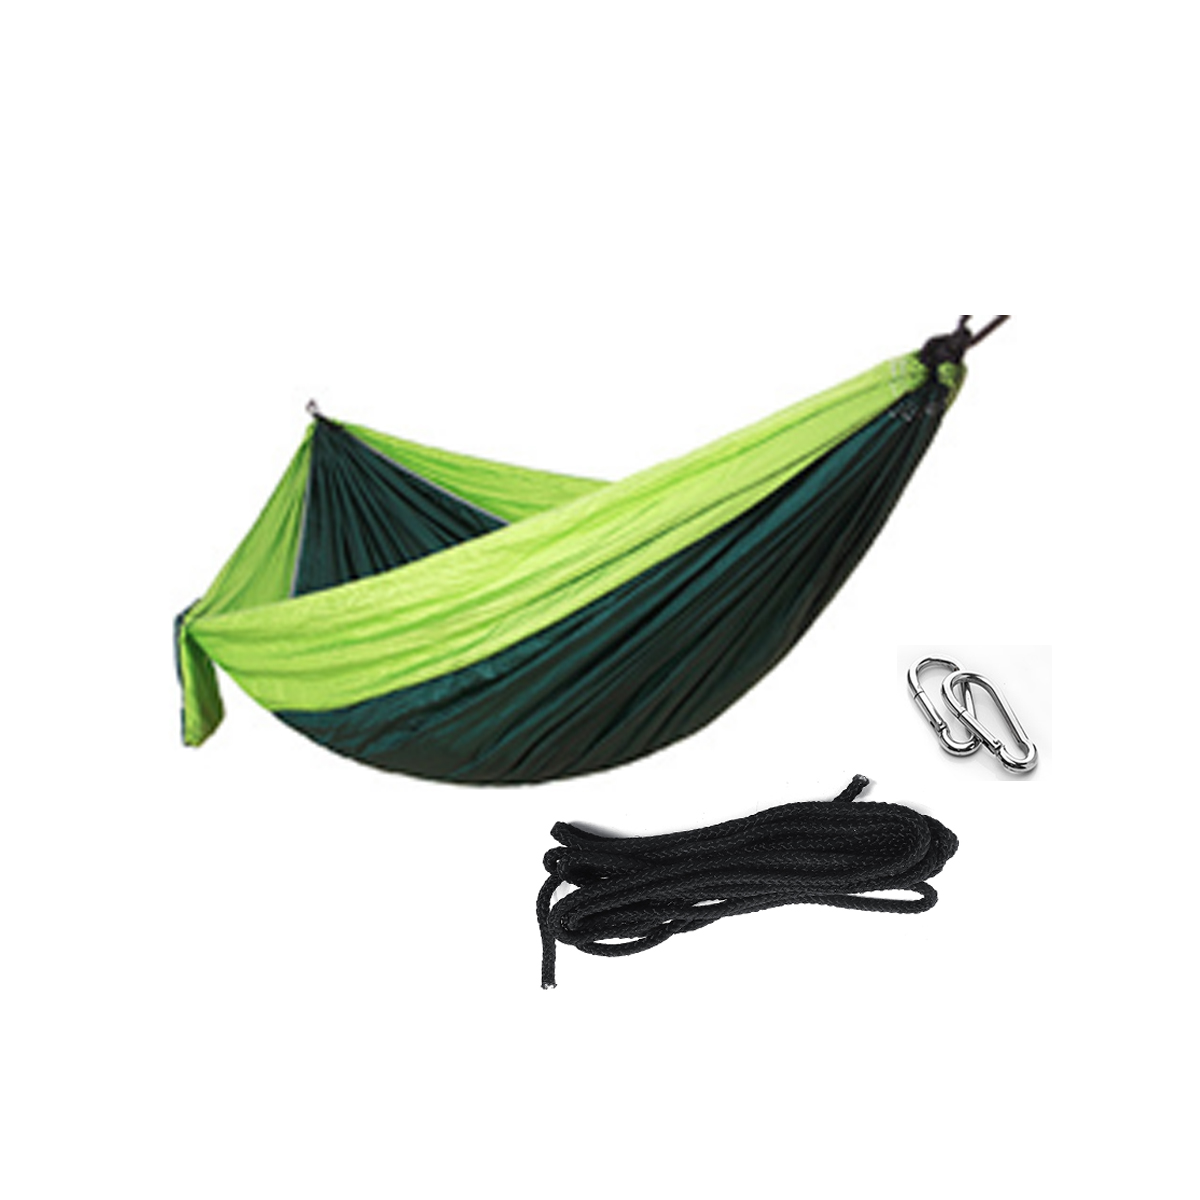 Outdoor-Travel-Double-Person-Hanging-Hammock-Max-Load-200KG-Portable-Camping-Hammock-Bed-1514882-9